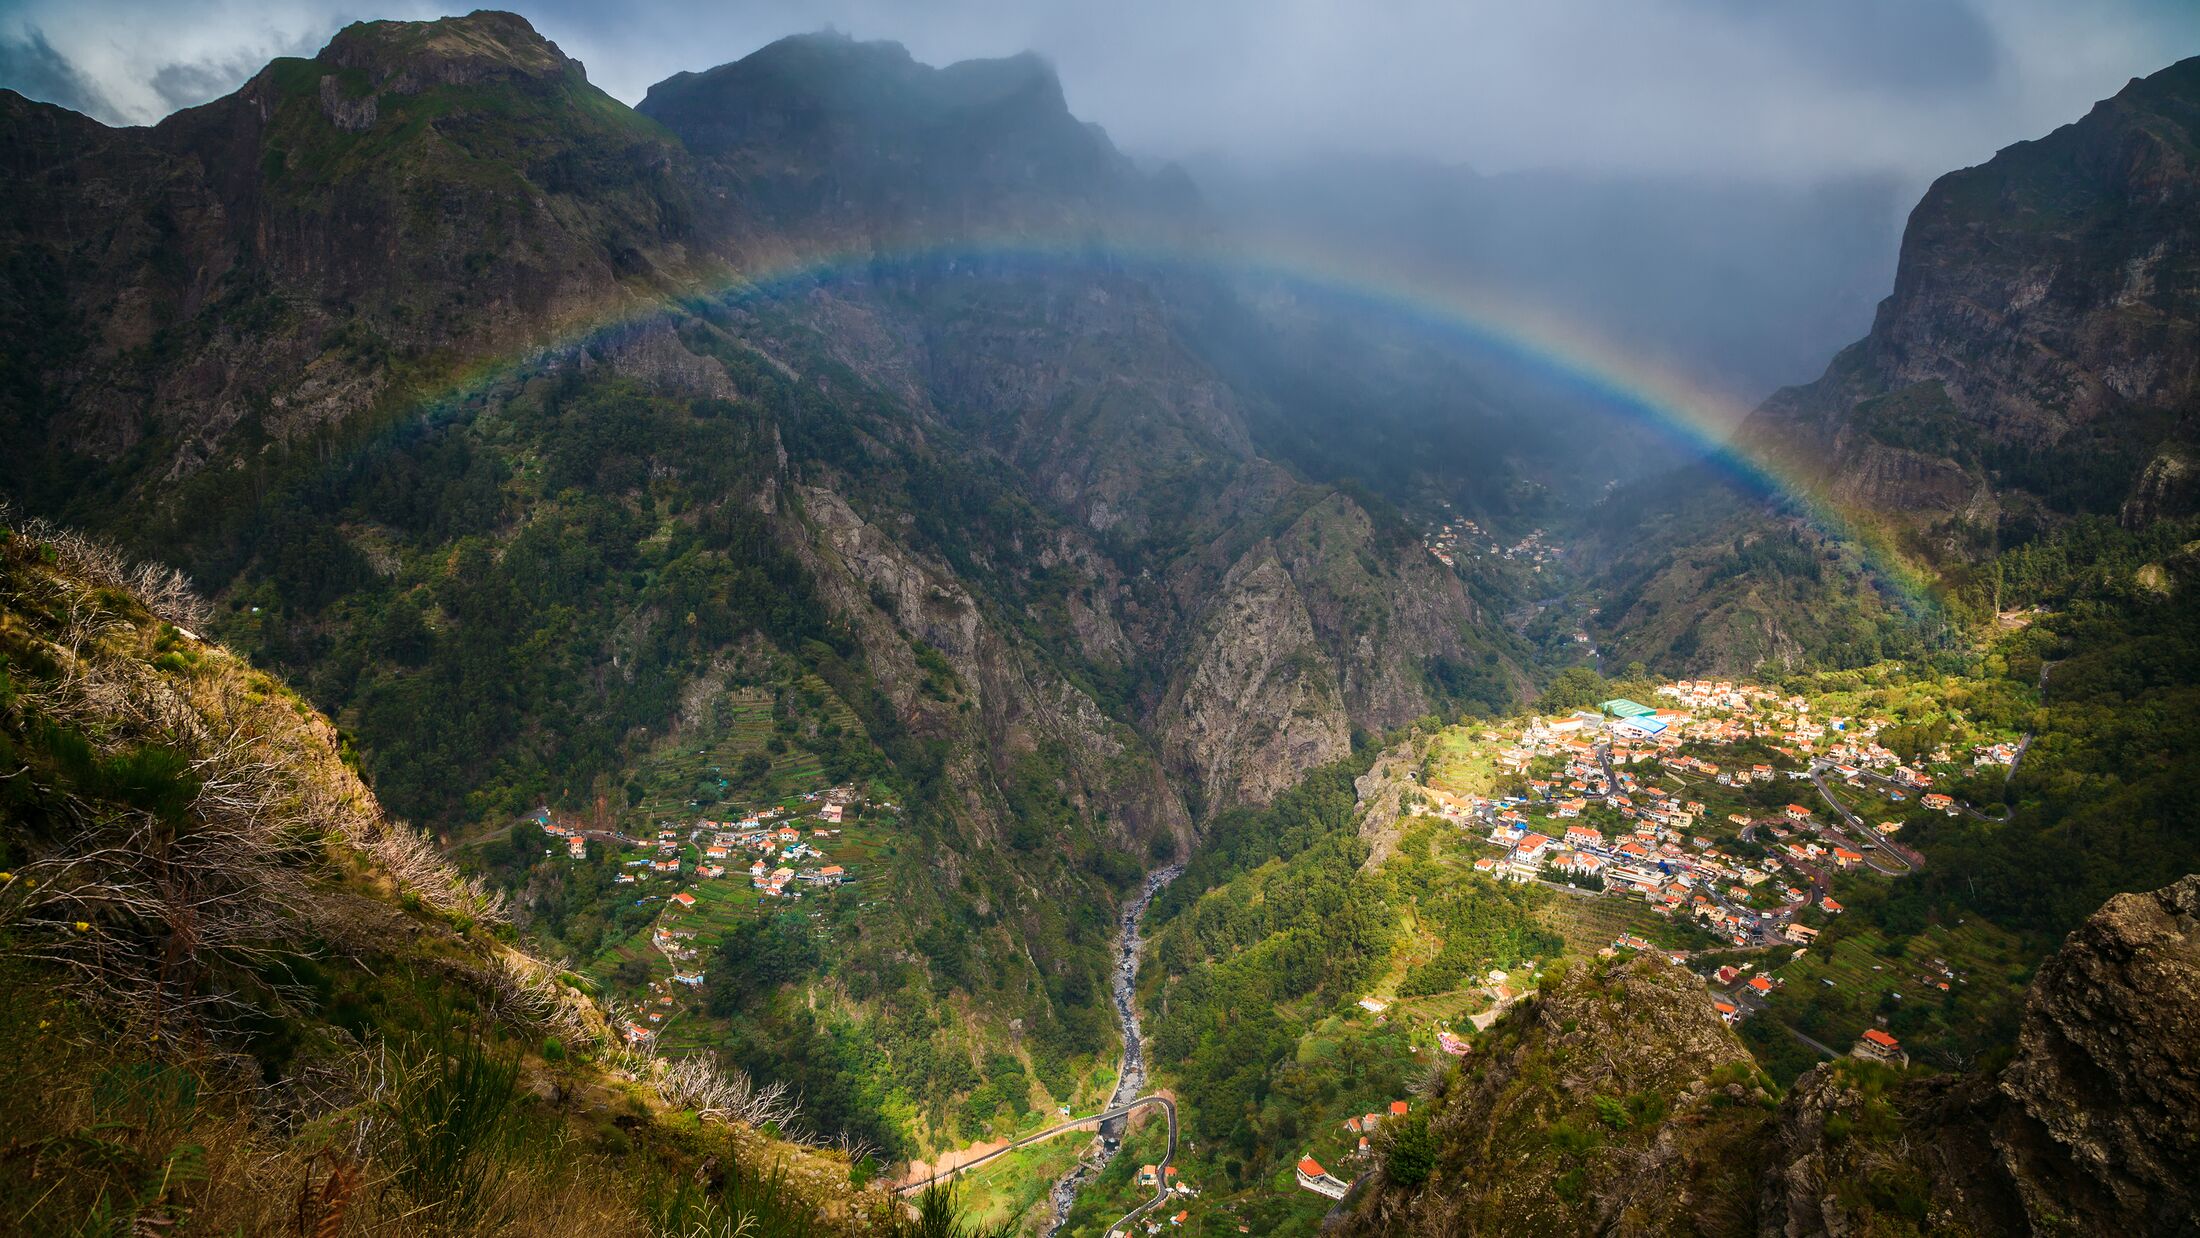 panoramic view of the rainbow above Nun's Valley, Madeira, Portugal